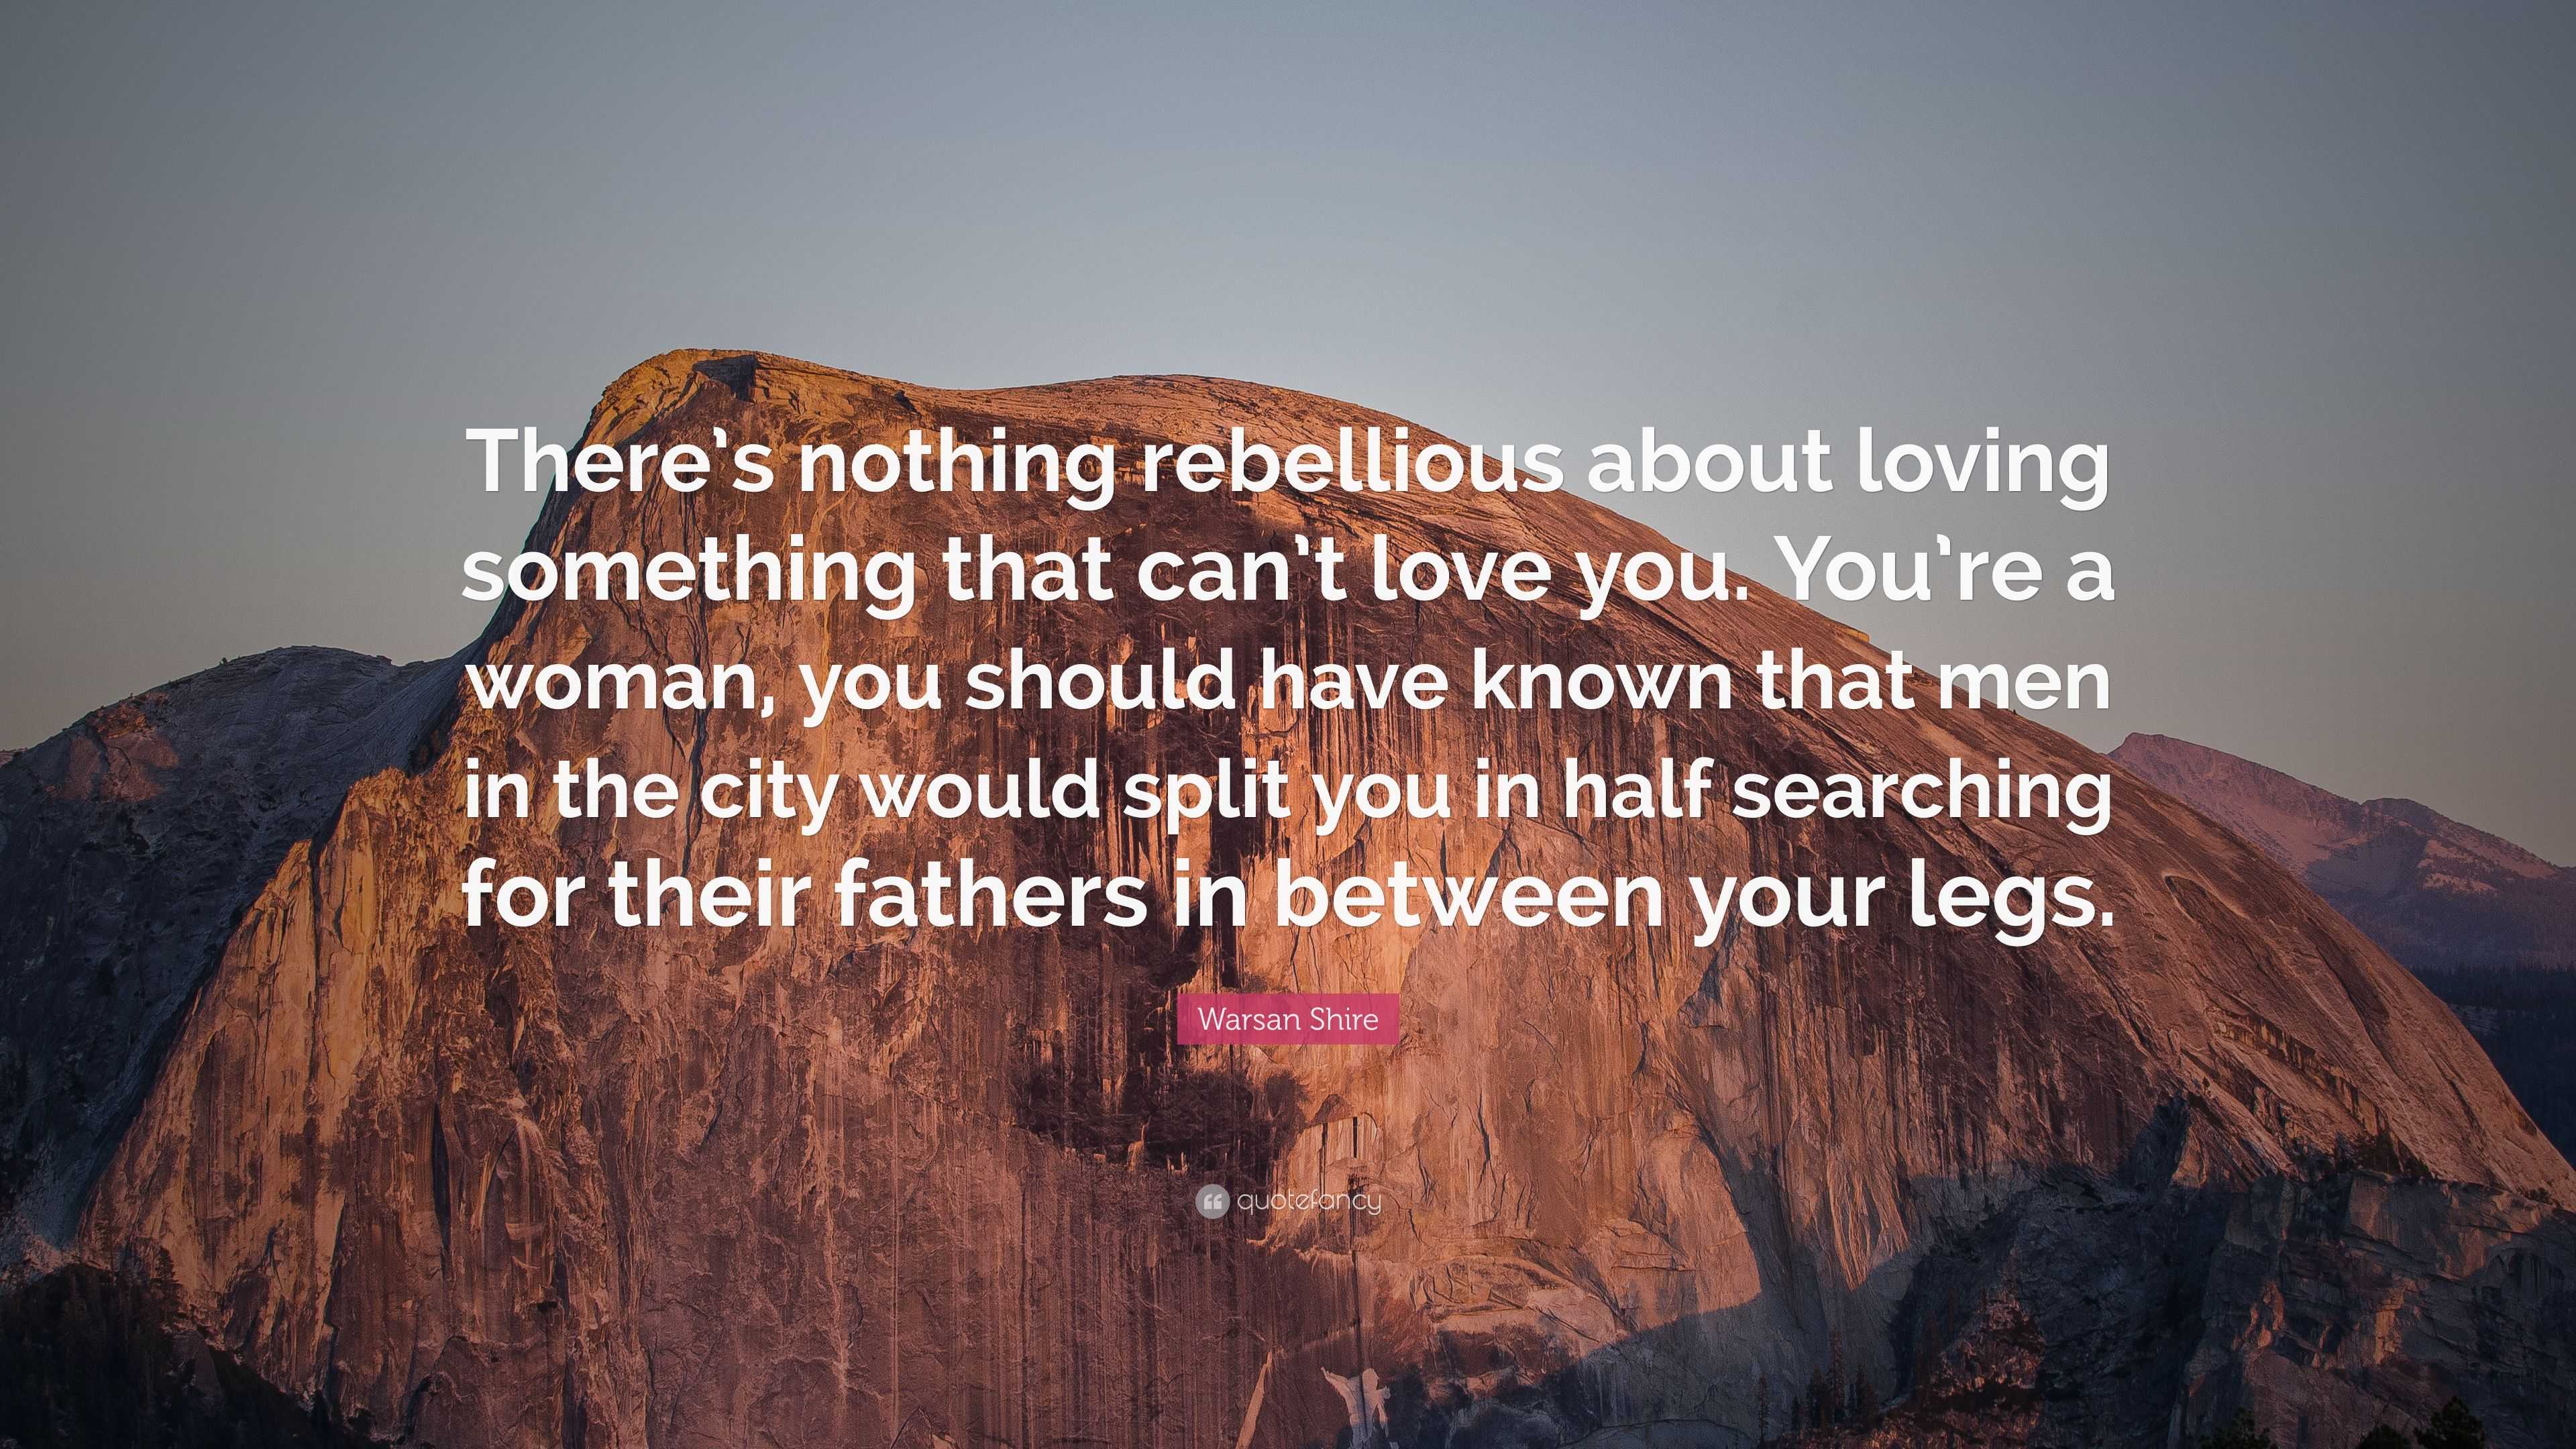 Warsan Shire Quote: “There’s nothing rebellious about loving something ...